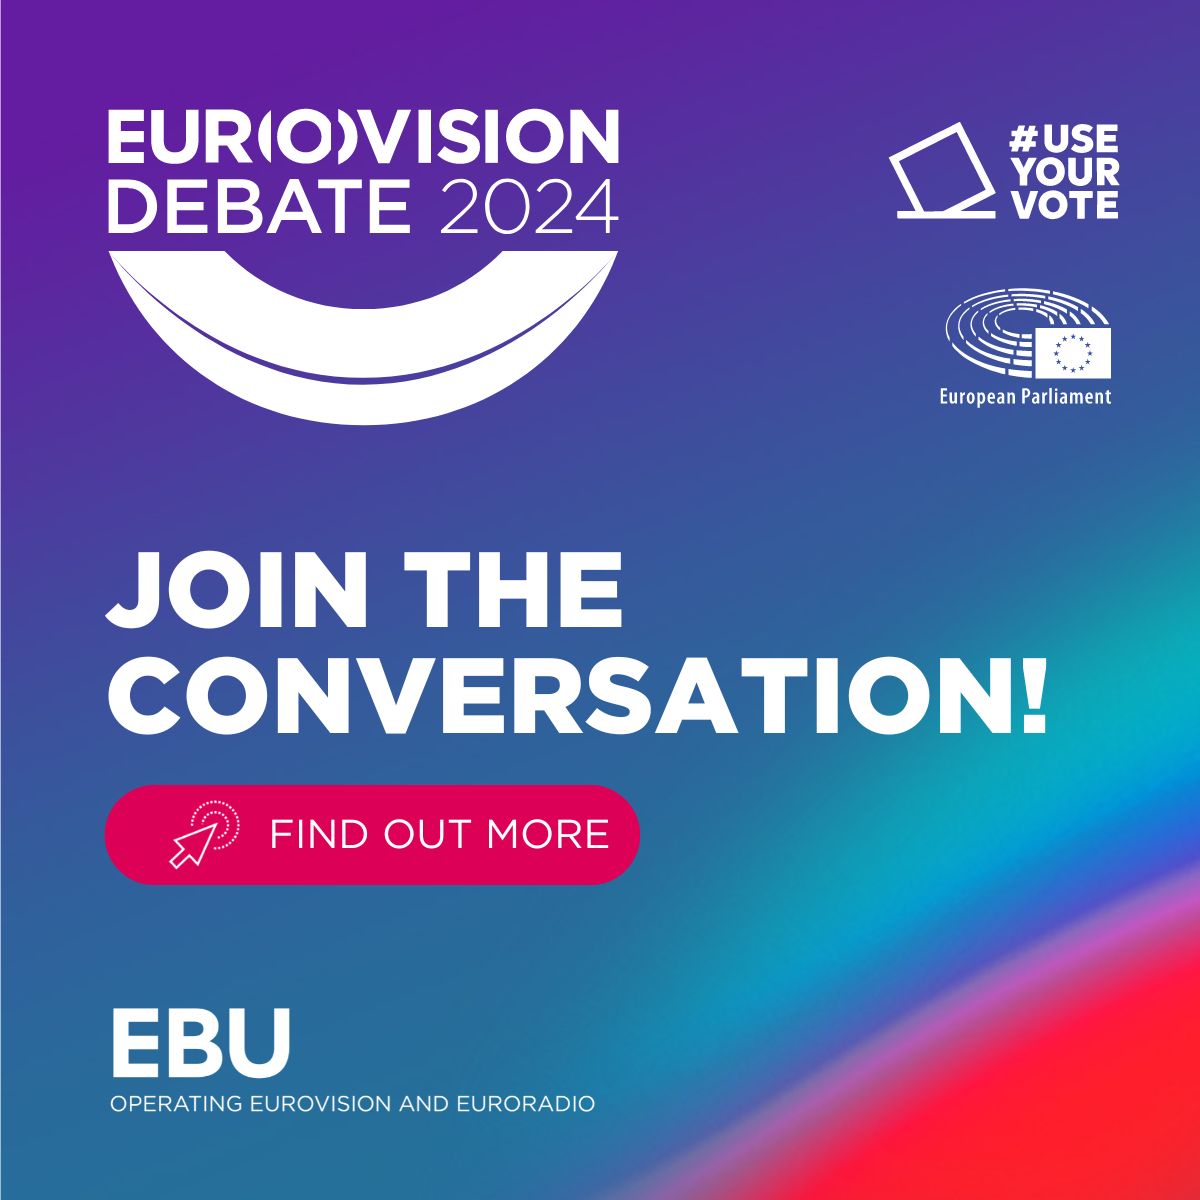 On 23 May 🗓️ the #EUelections lead candidates meet for definitive showdown at the #EurovisionDebate 2024 Don't miss it! ✊ Learn more: social.ebu.ch/EurovisionDeba…